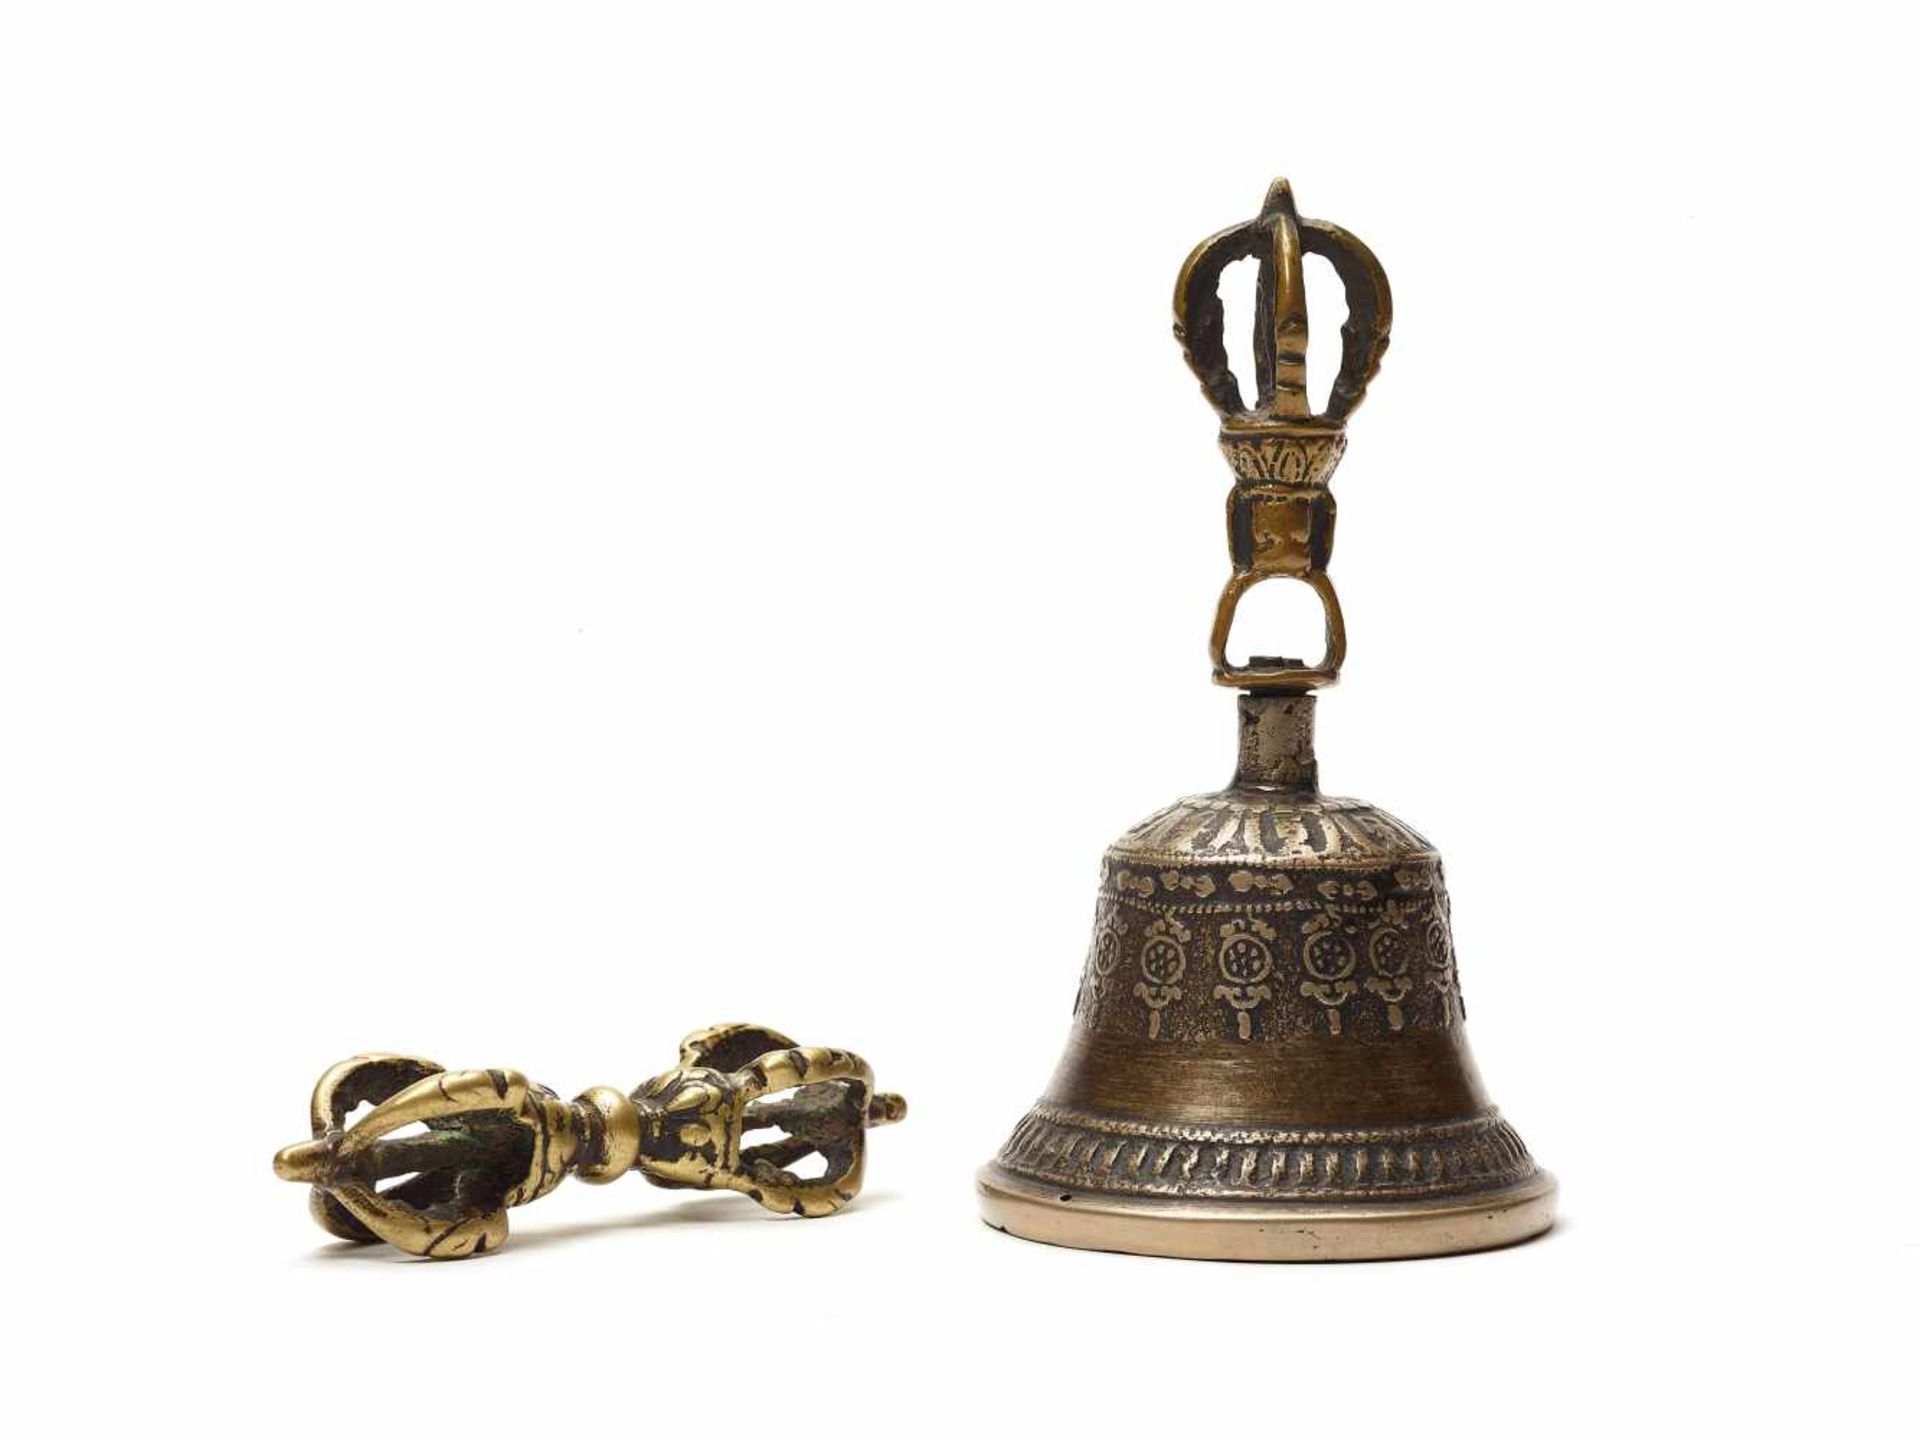 A BRONZE VAJRA AND A GHANTA BELL, 19th CENTURYBronzeTibet, 19th centuryThe handle of the Ghanta bell - Image 2 of 3